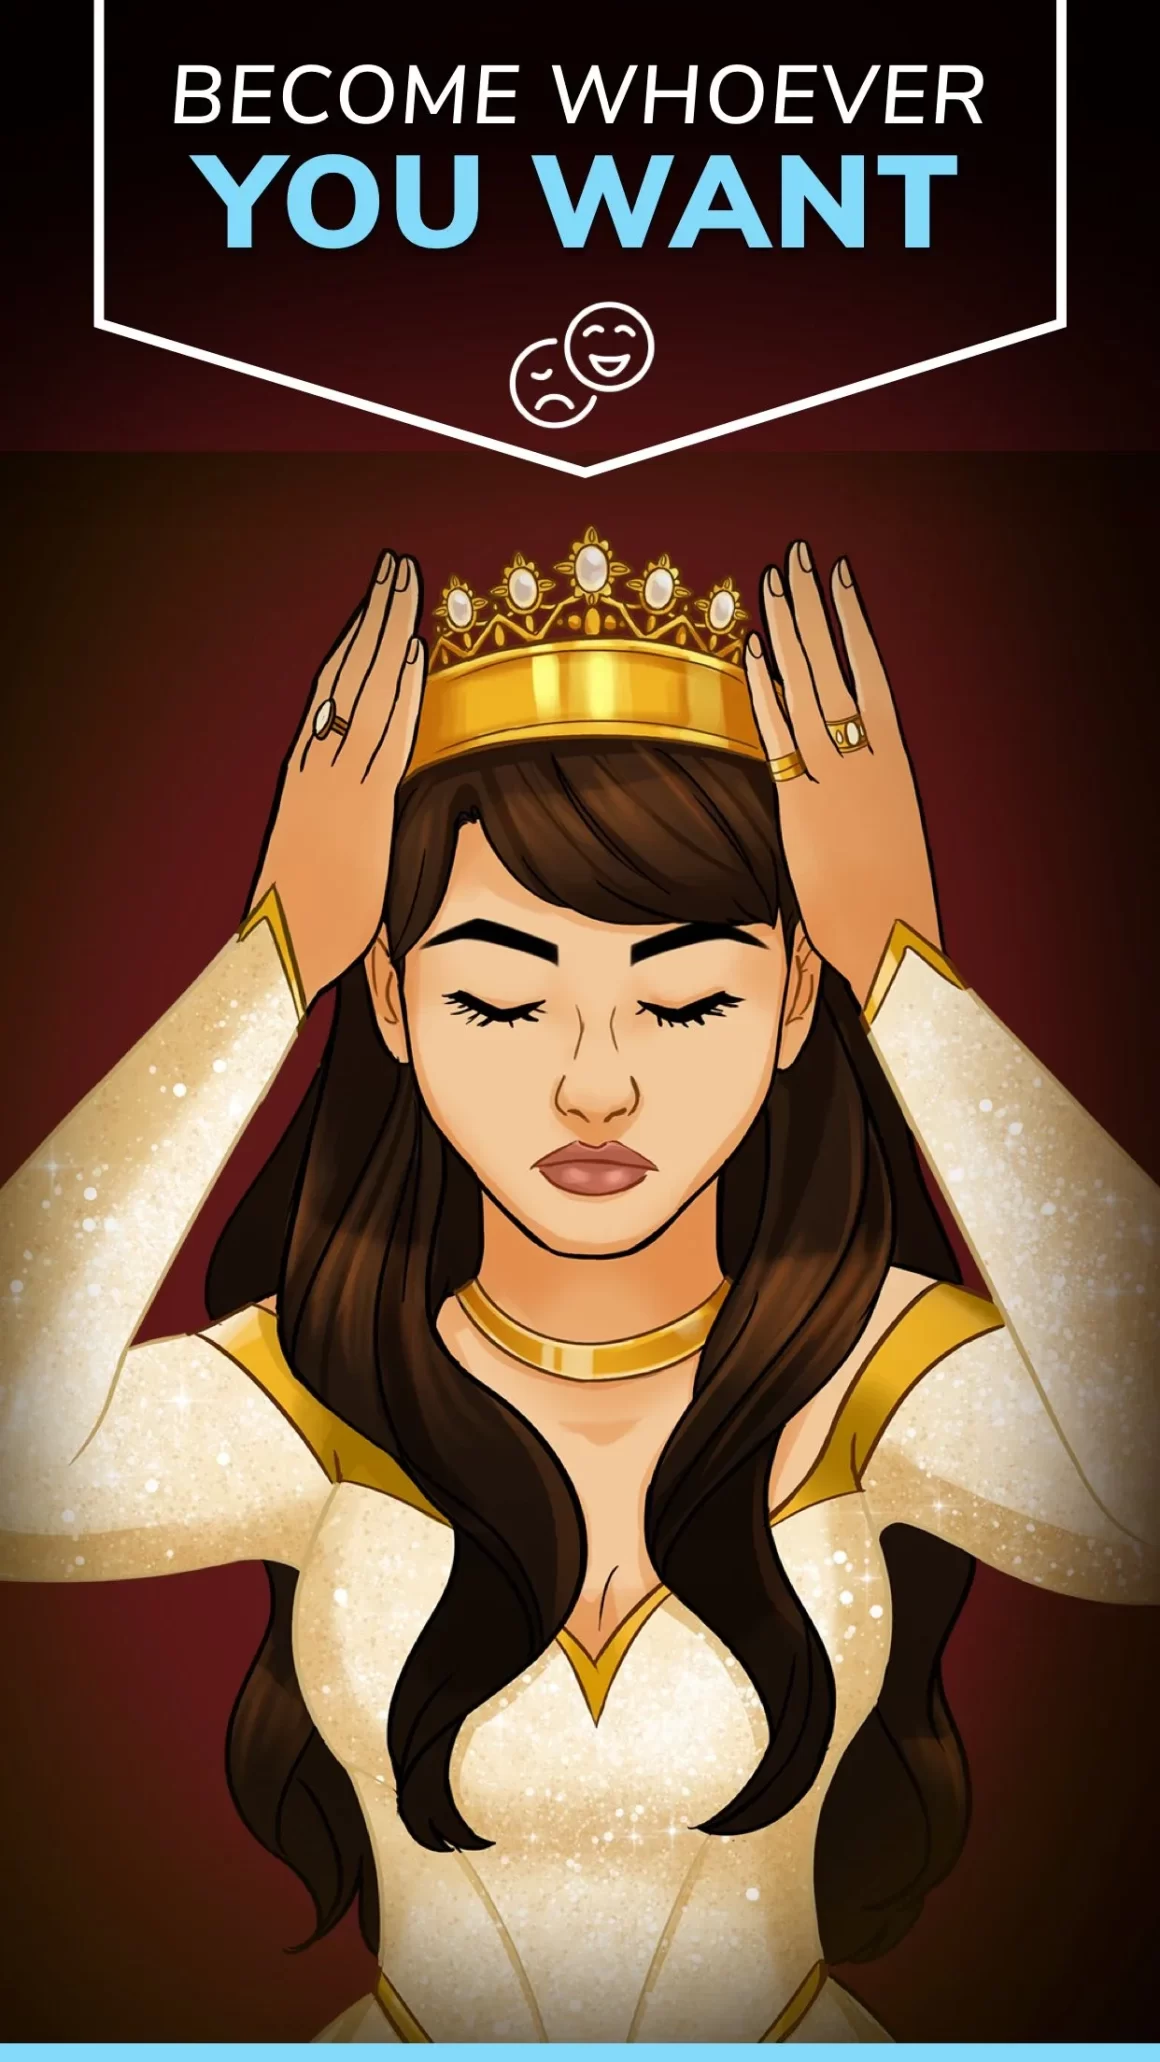 unnamed 5 1 1160x2062 1 - Episode Mod Apk V25.00 (Unlimited Gems And Passes) Unlocked